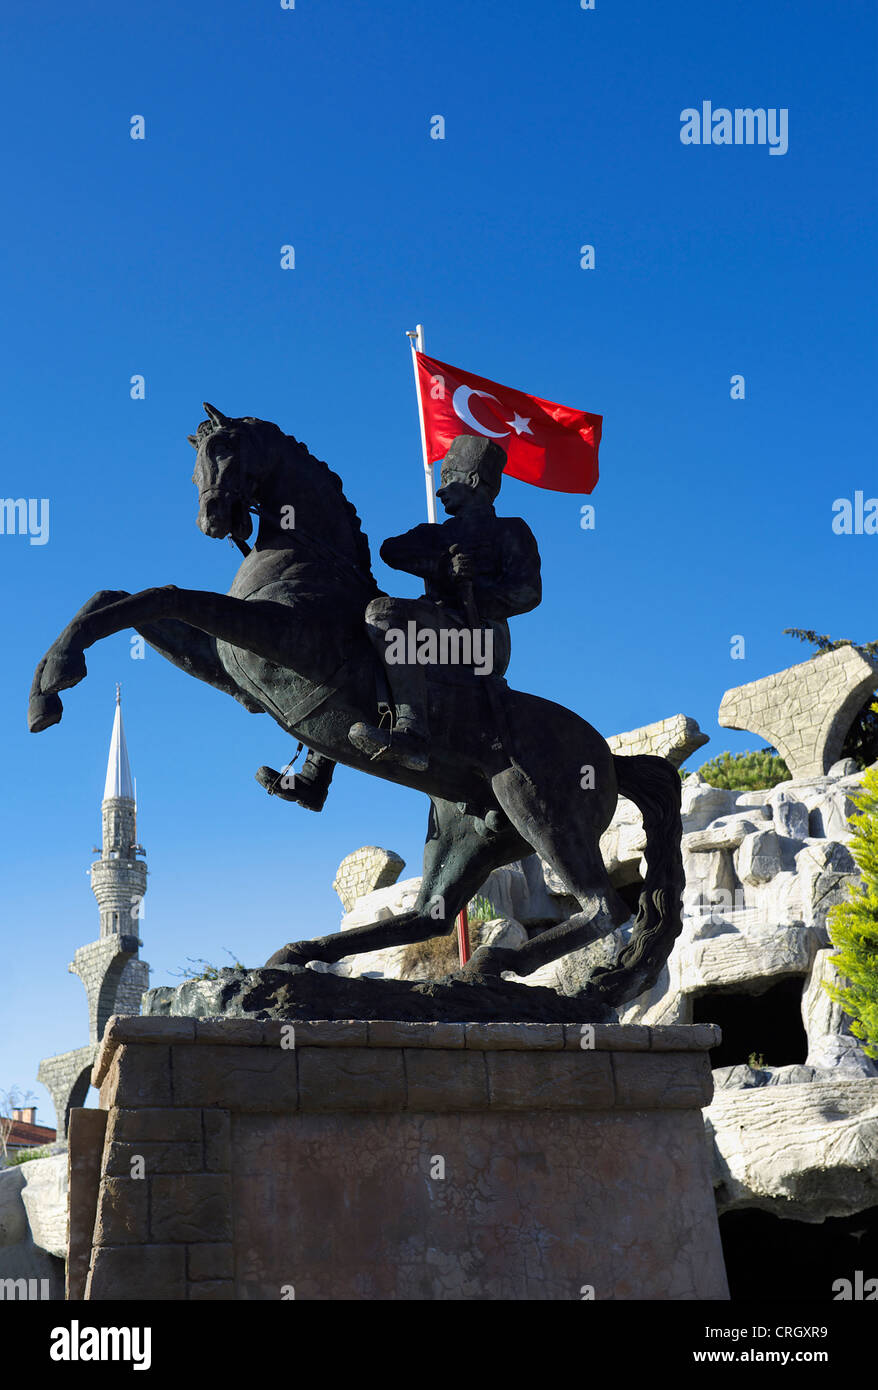 Statue of Ataturk on a horseback with the Turkish flag, in the town square, Belek, Antalya, Turkey Stock Photo